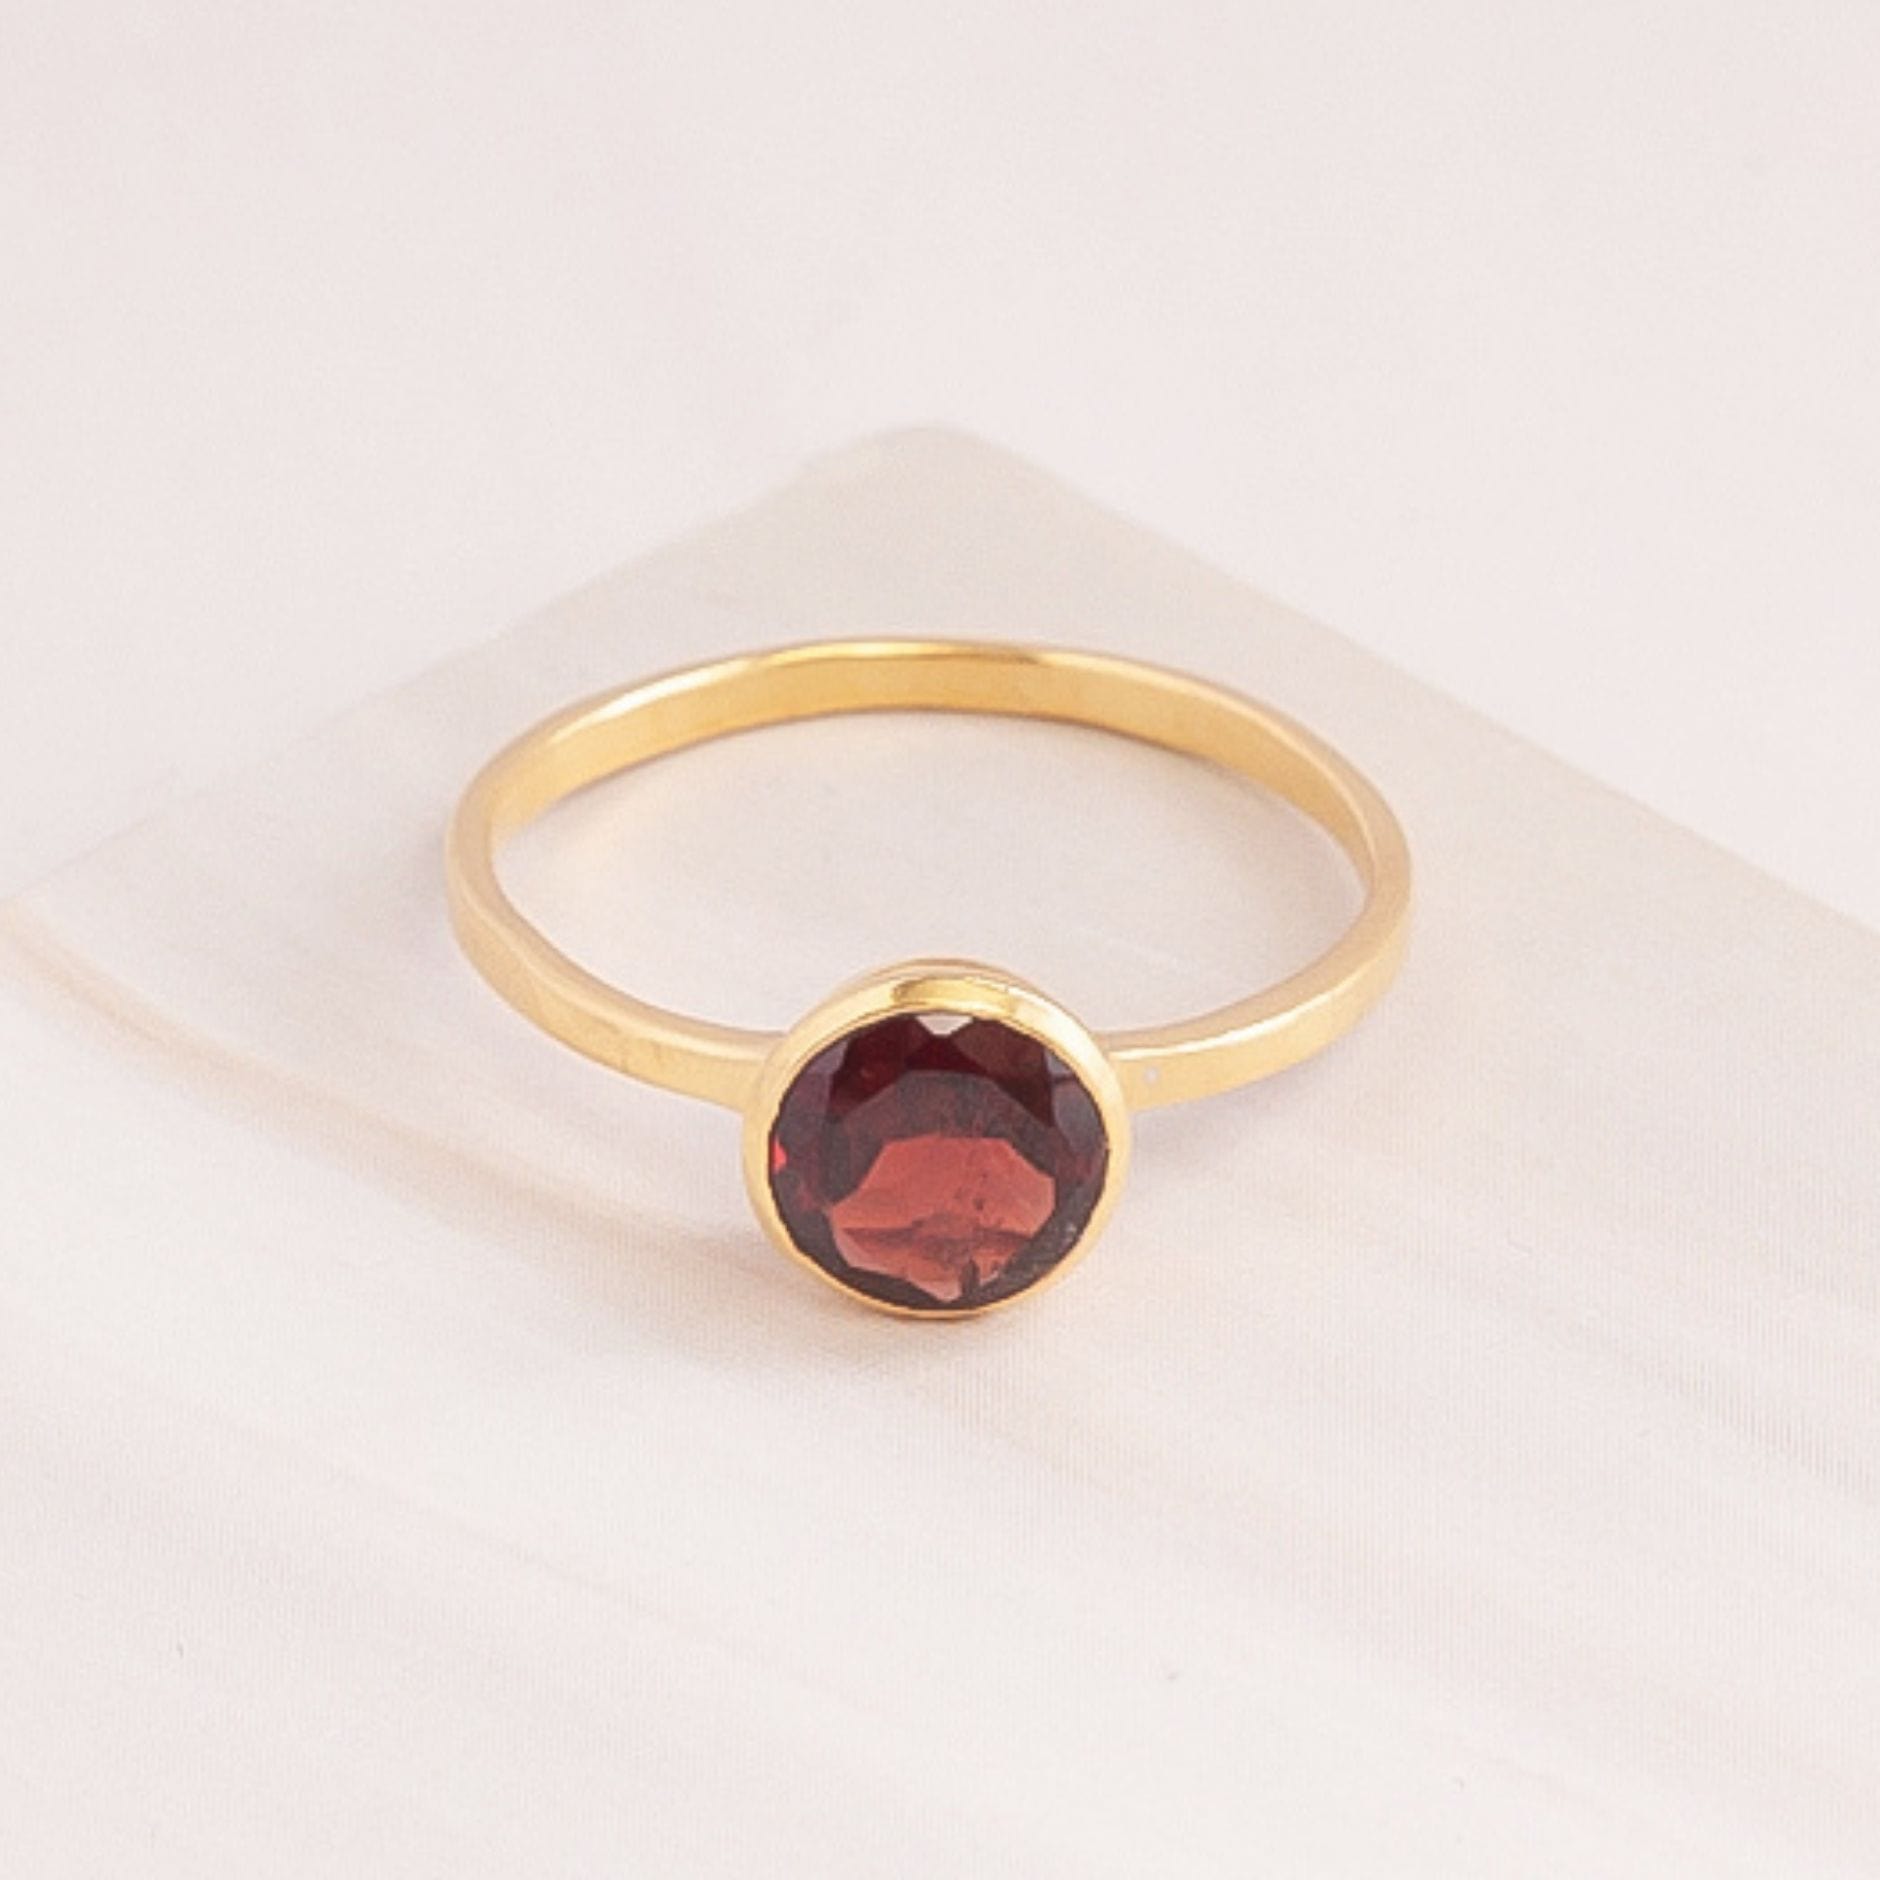 Emblem Jewelry Rings Red Garnet / Round Signature Candy Gemstone Stack Rings (Ring Size 4)